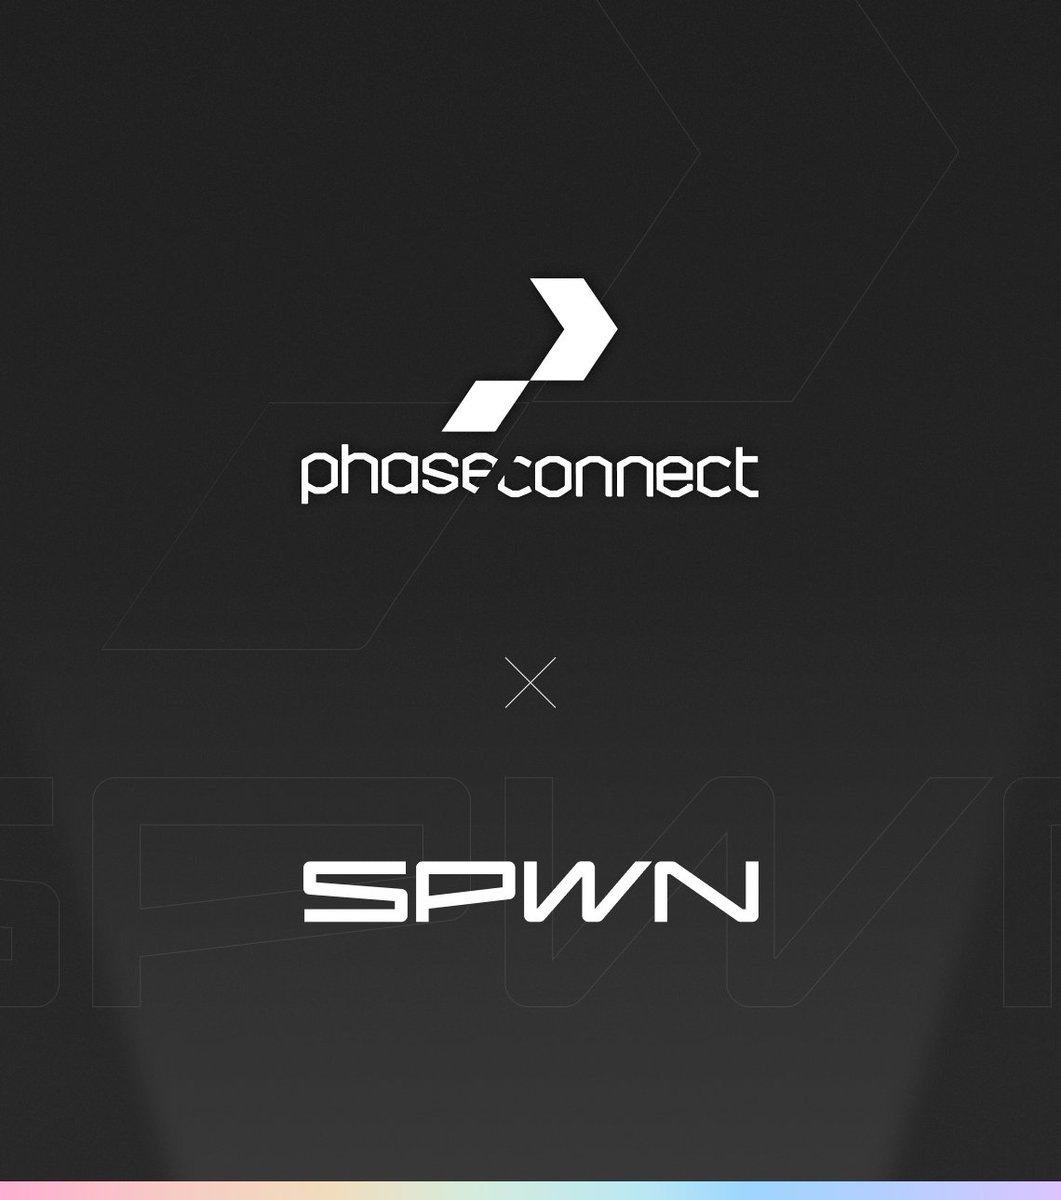 🎉[Collaboration News]🎉 Exciting Phase Connect X SPWN collaboration is coming very soon! Please look forward to what we've prepared at #OffKaiGen3 ! #PhaseConnect